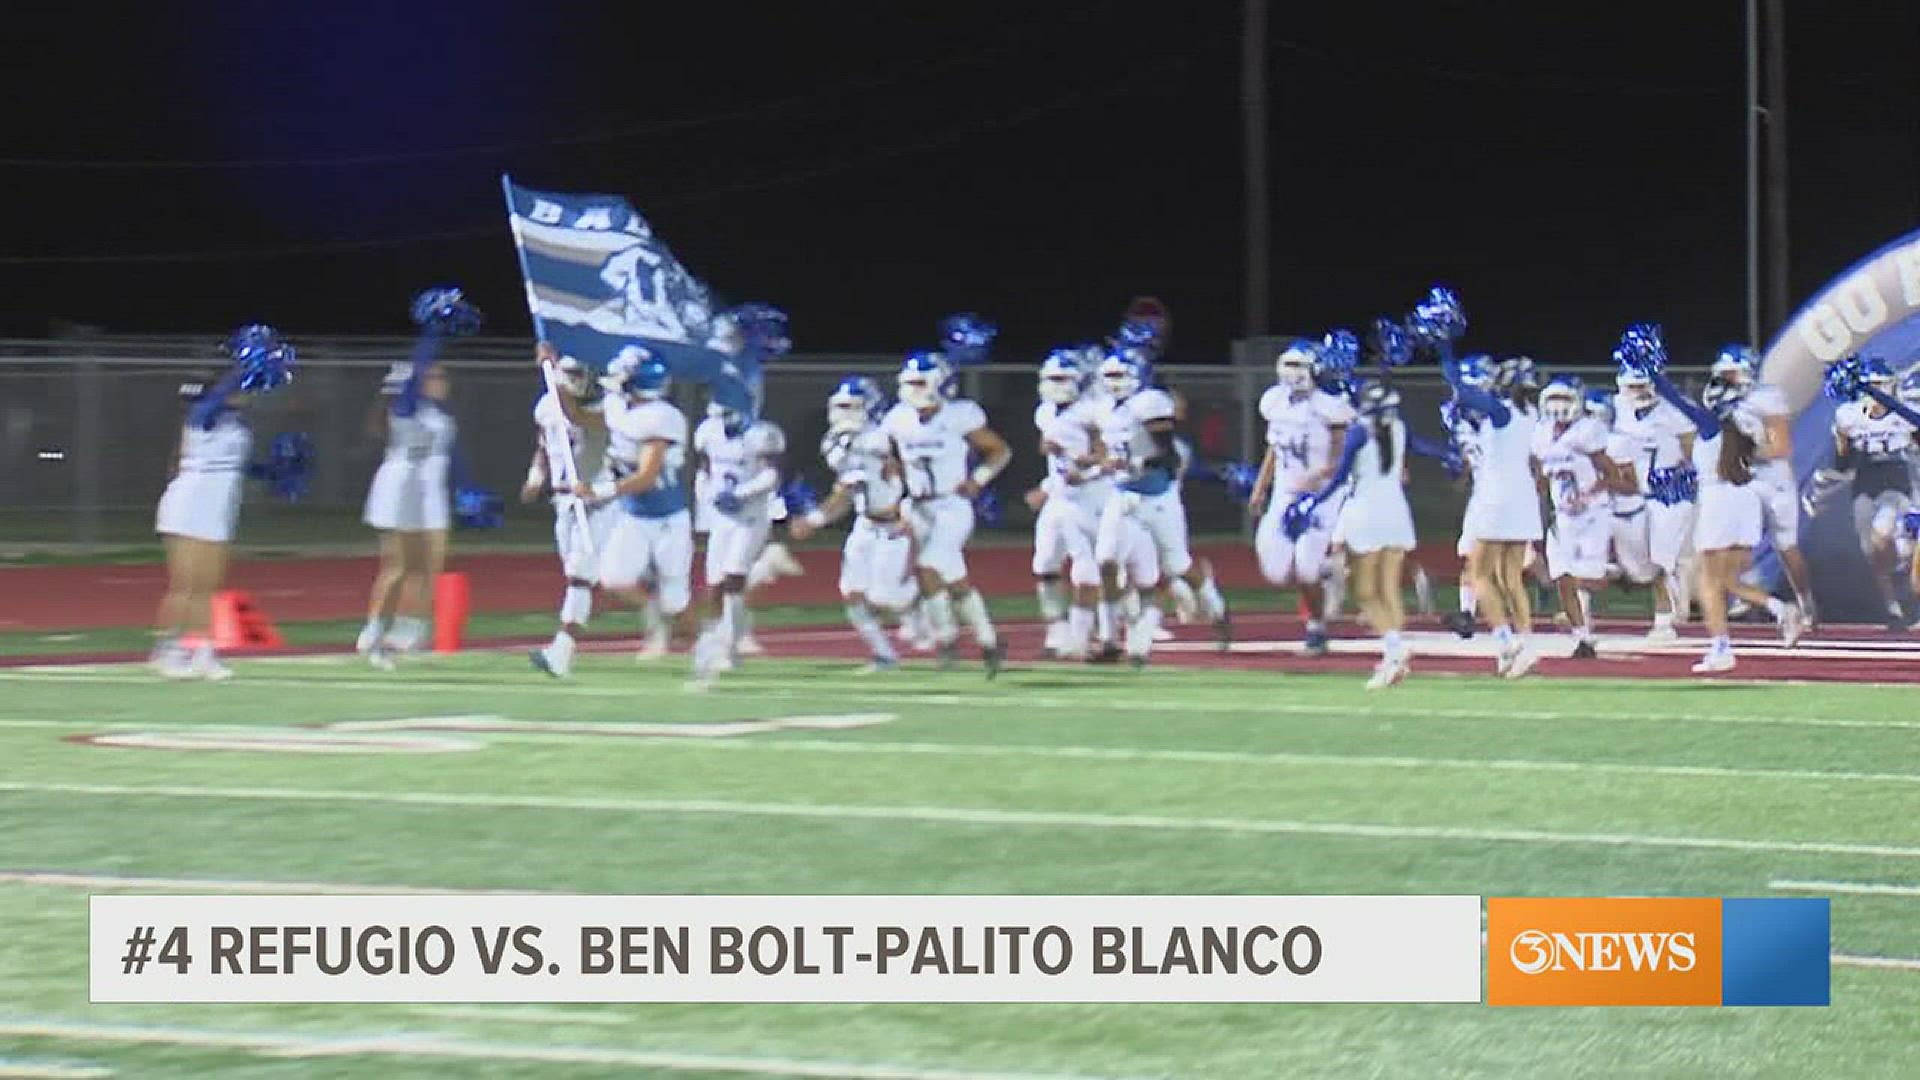 Refugio scored early and often in a 66-14 win over Ben Bolt-Palito Blanco and Three Rivers ran over Freer 62-19 in first round action.